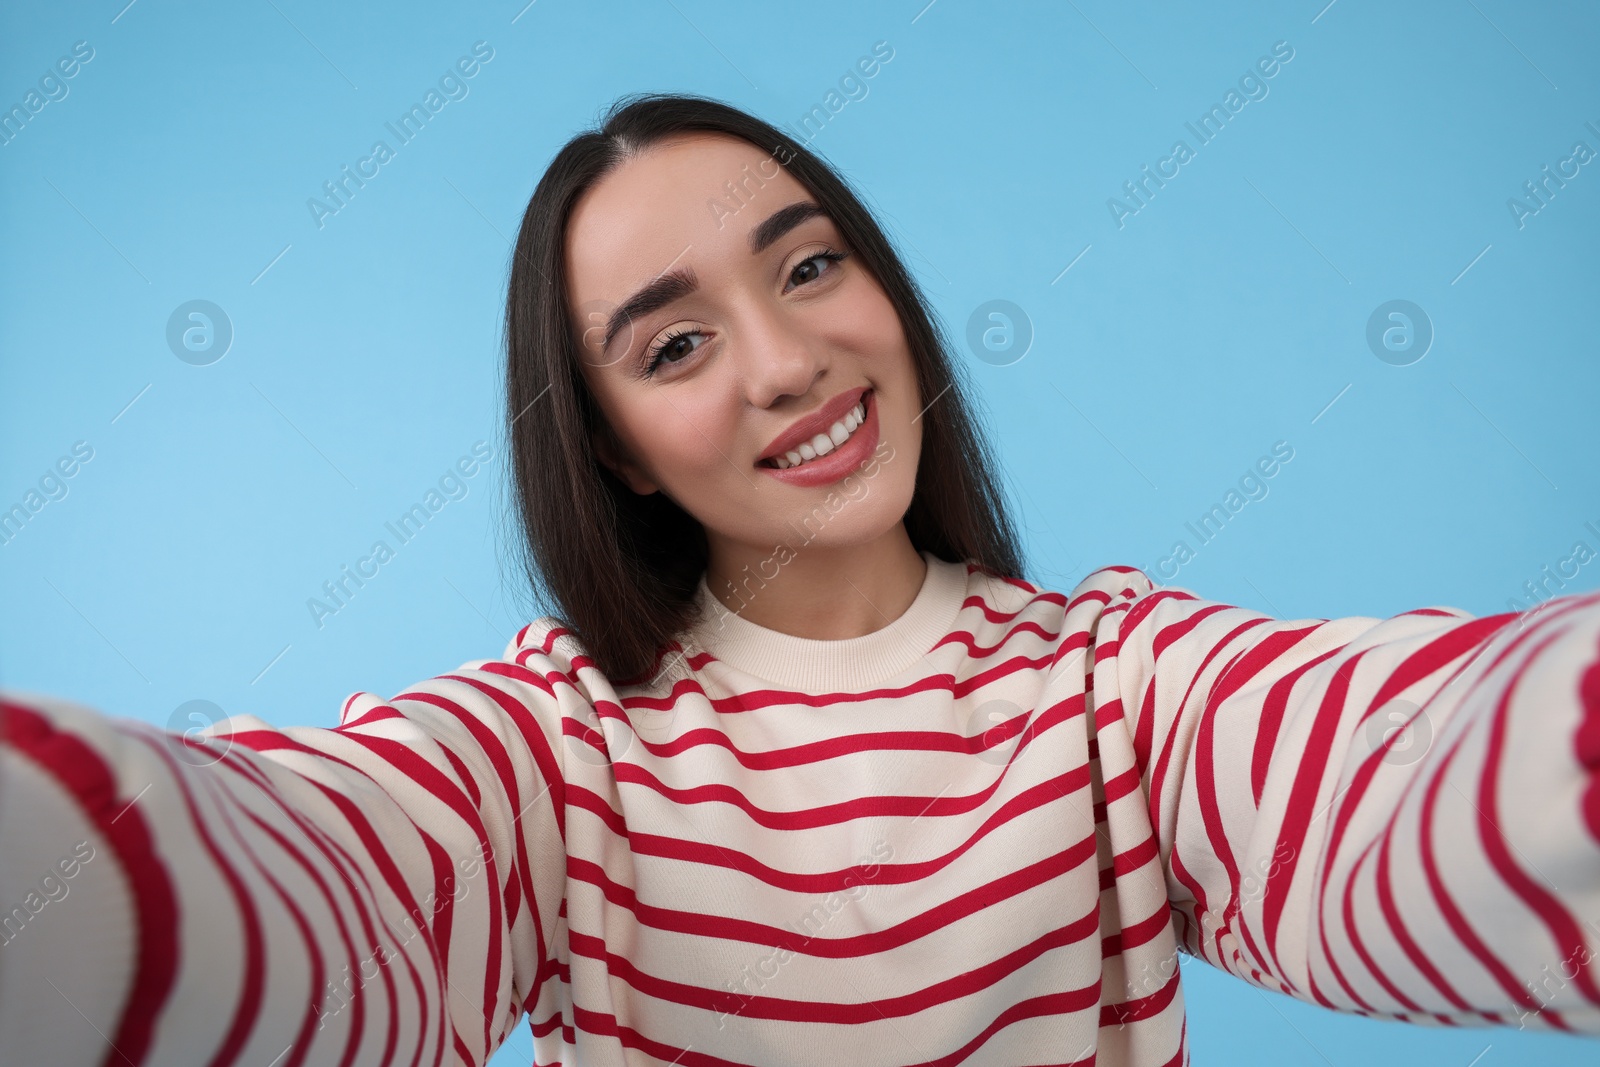 Photo of Smiling young woman taking selfie on light blue background